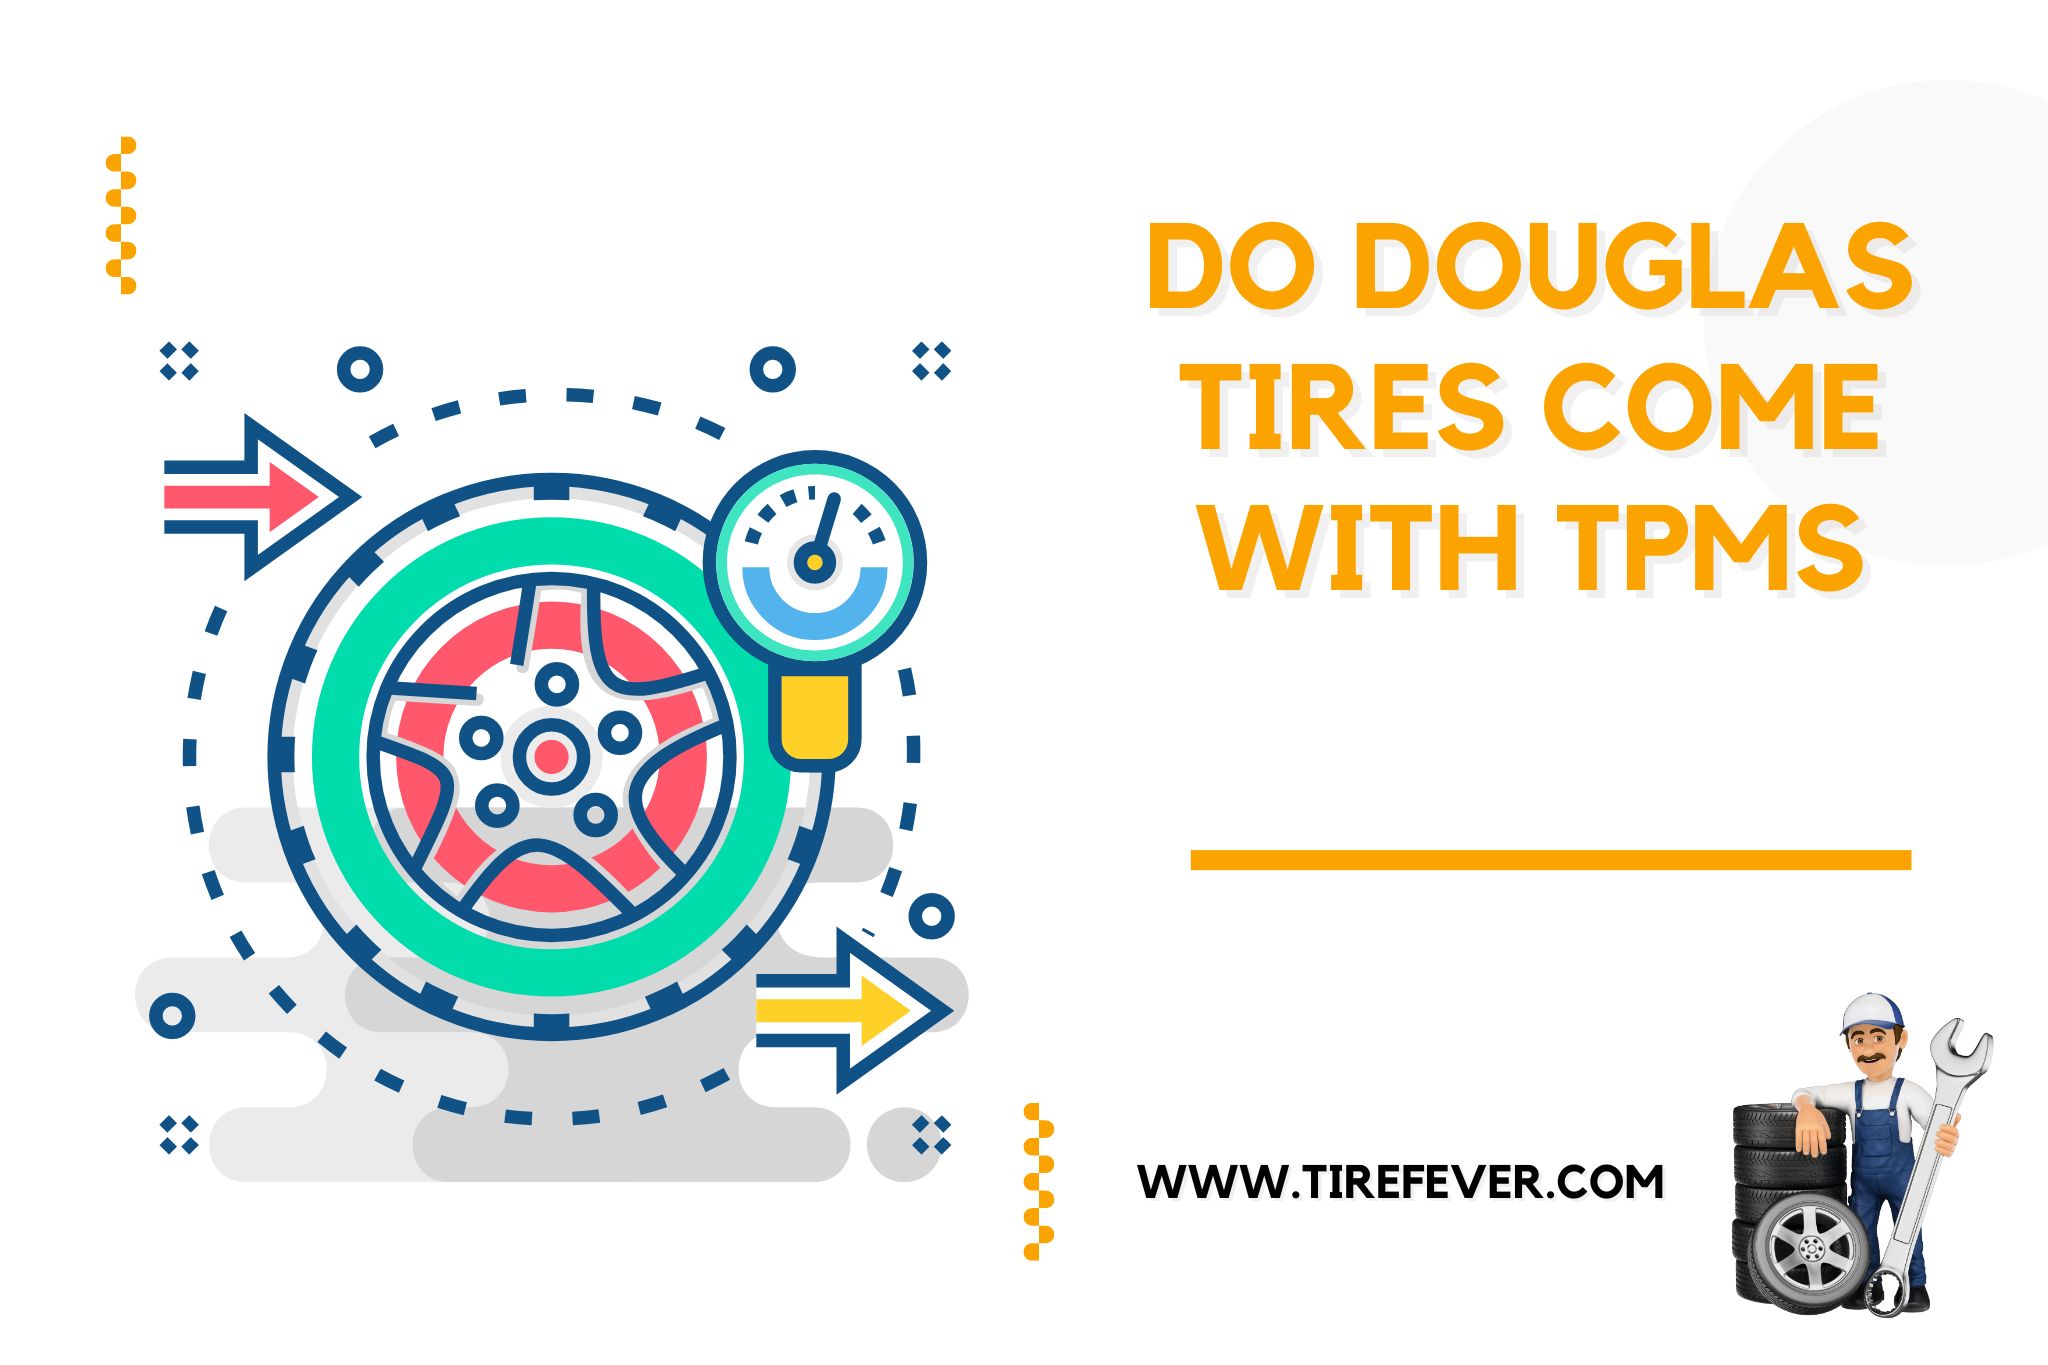 Do Douglas Tires Come with TPMS